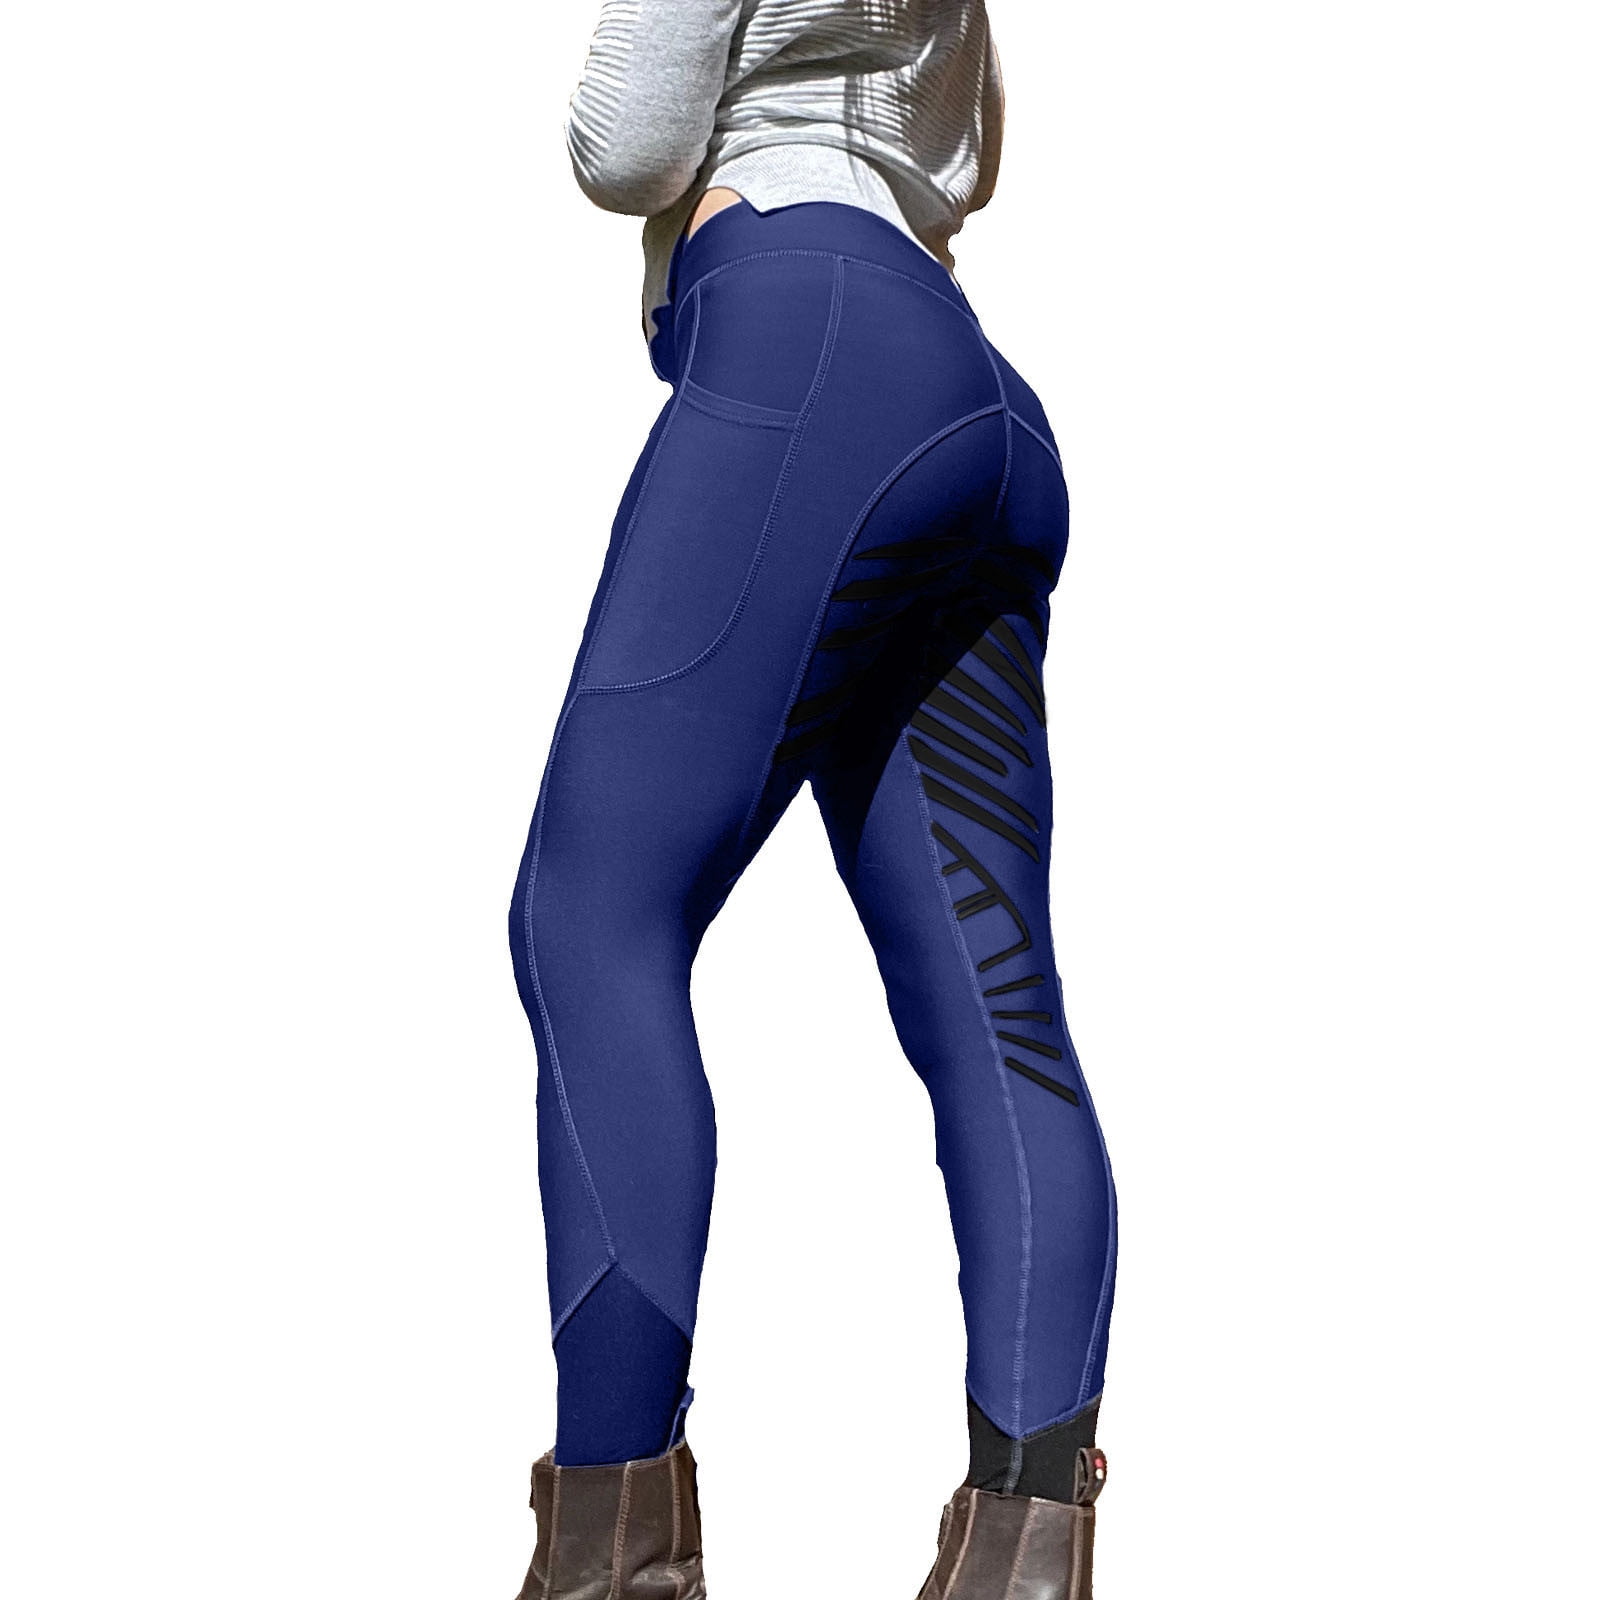 Women's Riding Pants Exercise High Waist Sports Riding Equestrian Trousers 